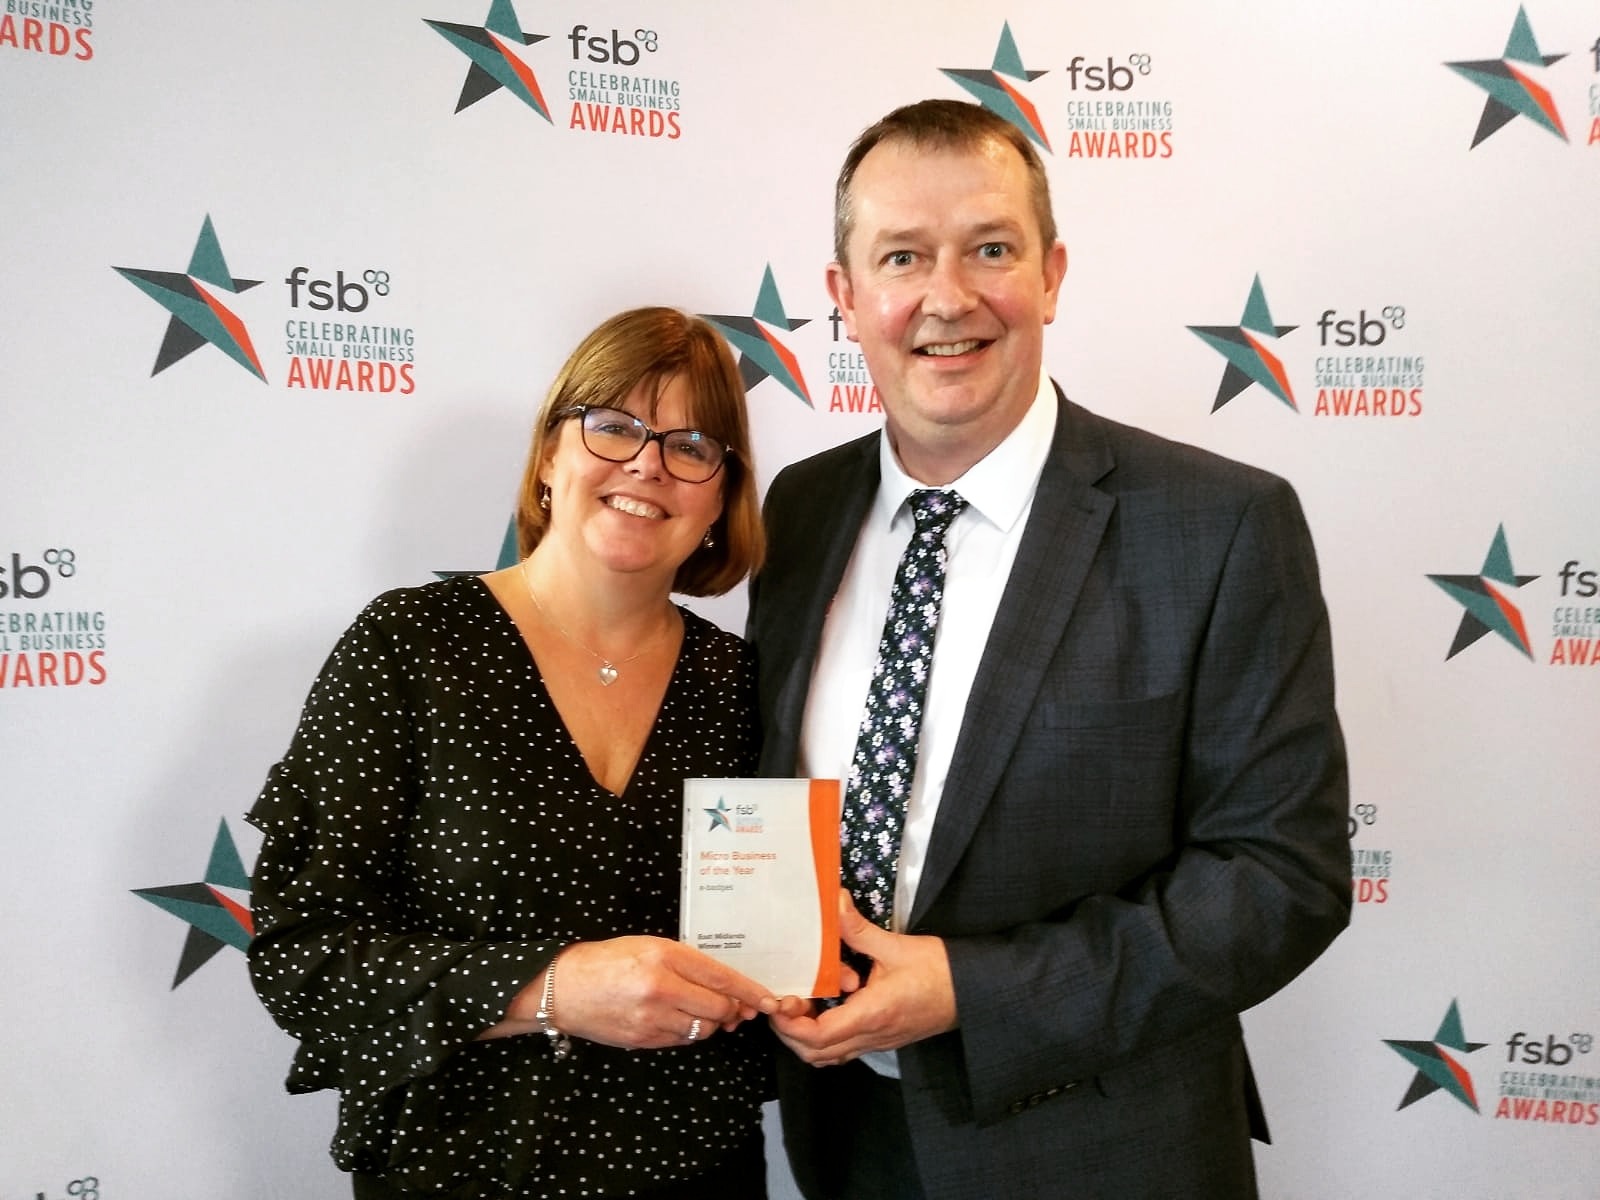 Andrew and Philippa Vear winning Micro Business of the Year regional award from Federation of Small Business FSB